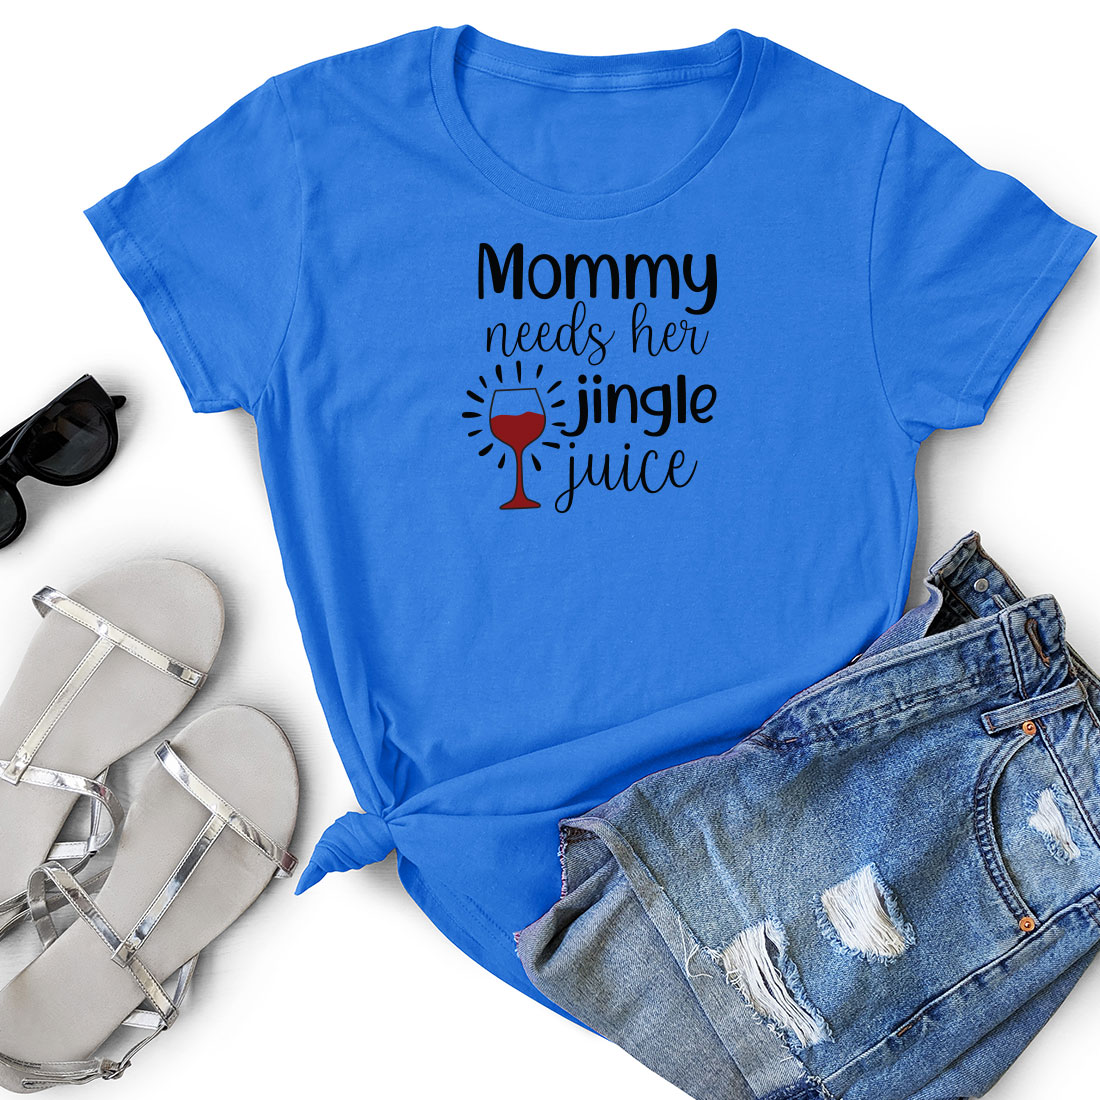 T - shirt that says mommy needs her single juice.